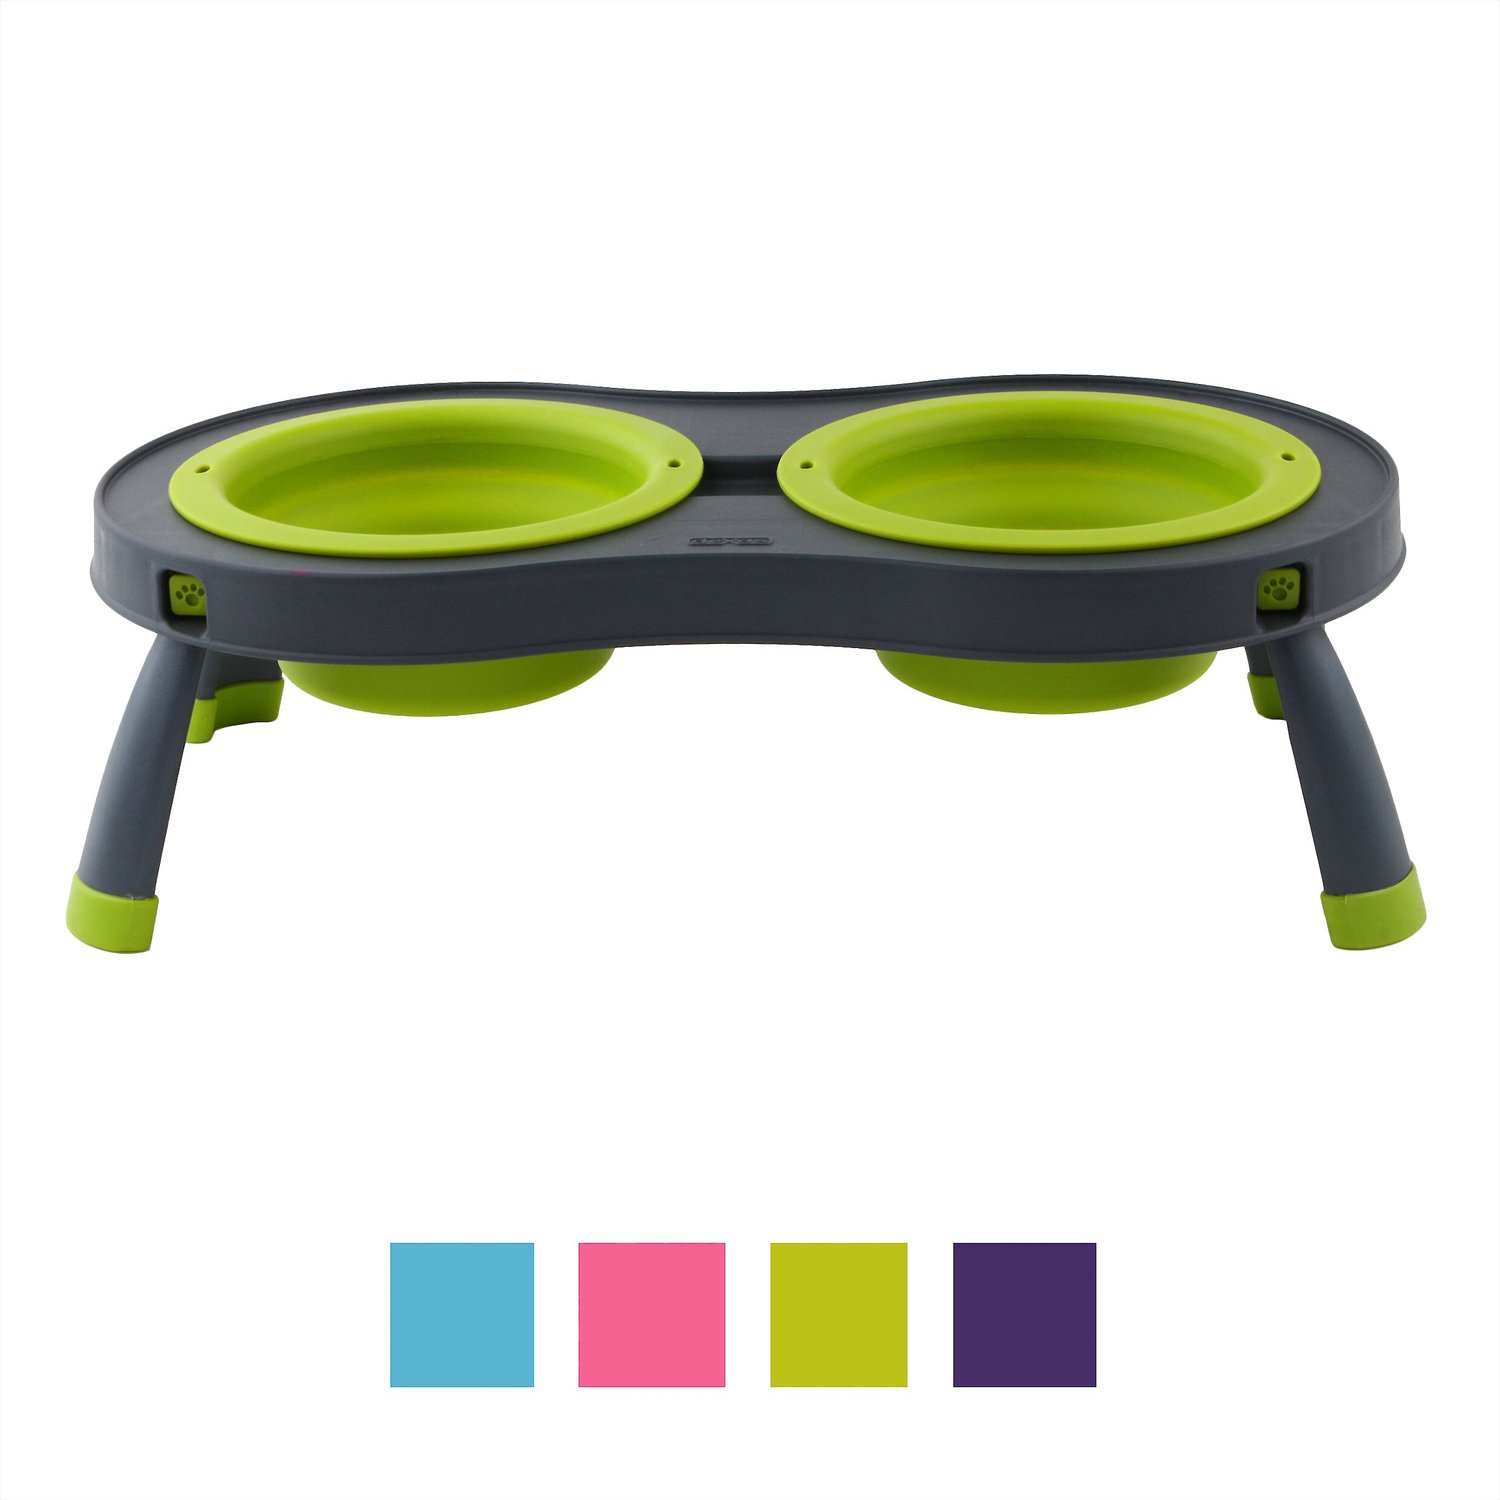 Dexas Popware for Pets Double Bowl Collapsible Travel Feeder 2.5 Cup Capacity Green 